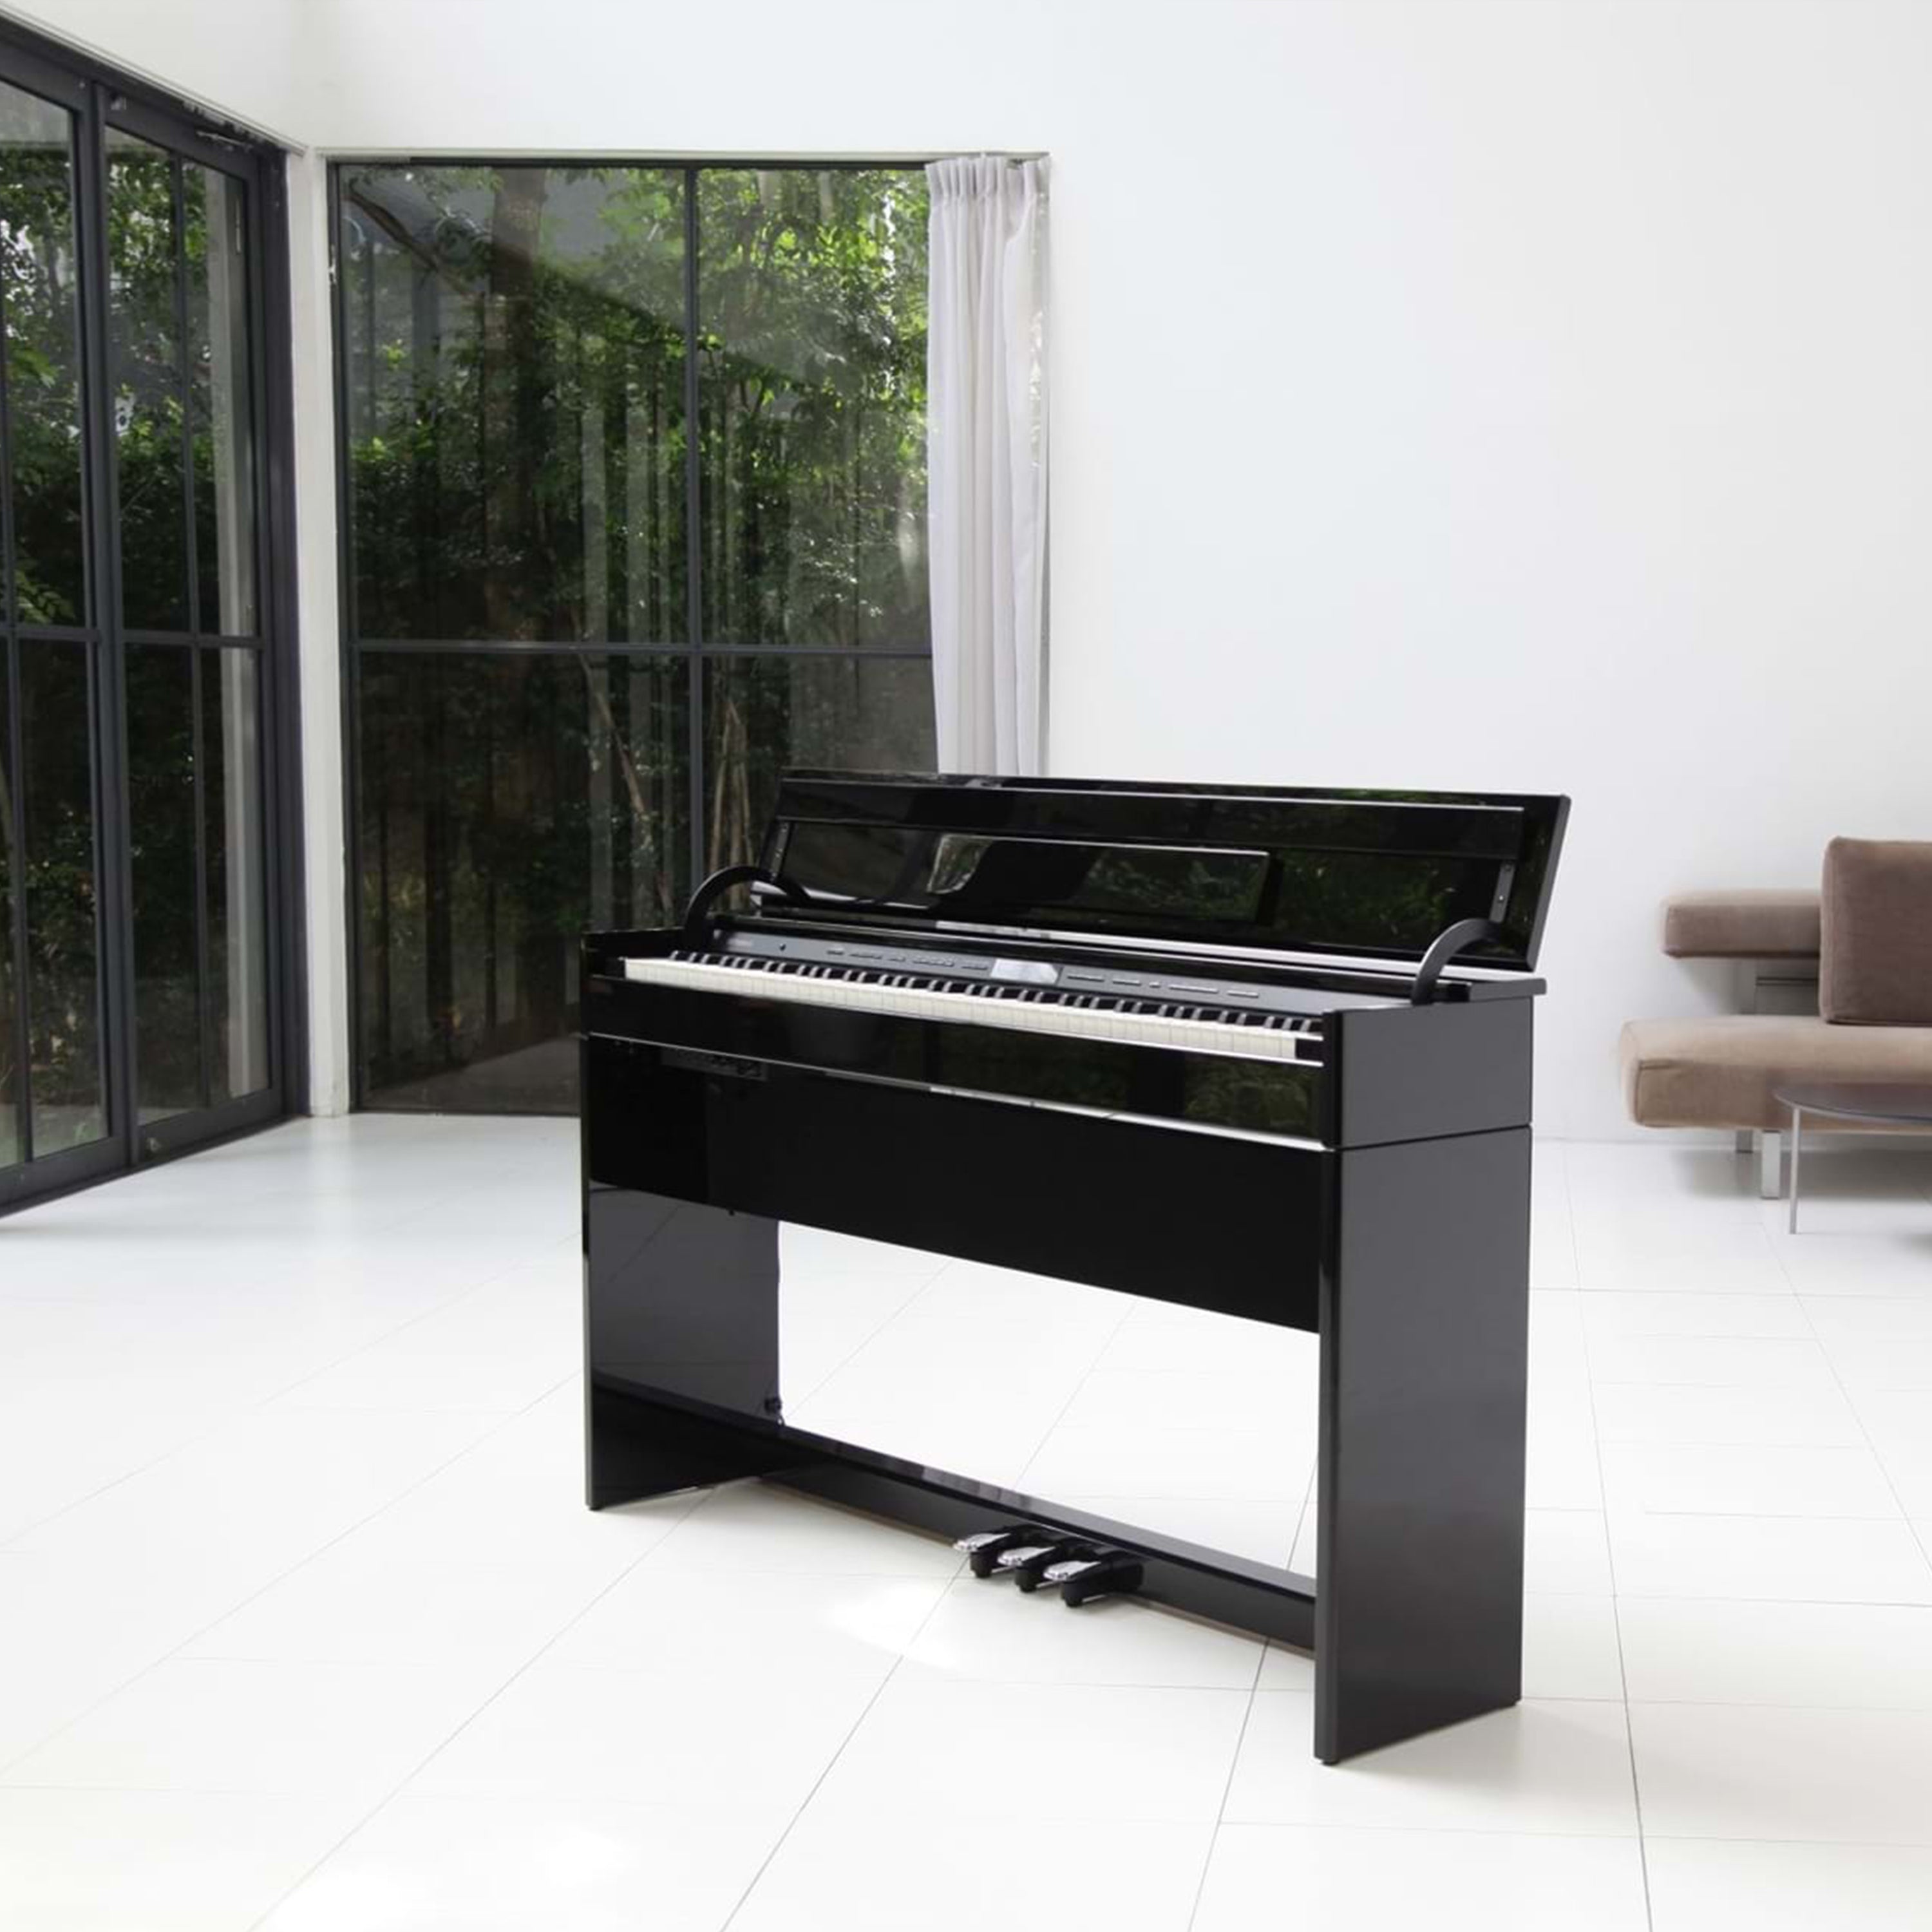 Roland DP603 Digital Piano - Polished Ebony - in a stylish living space